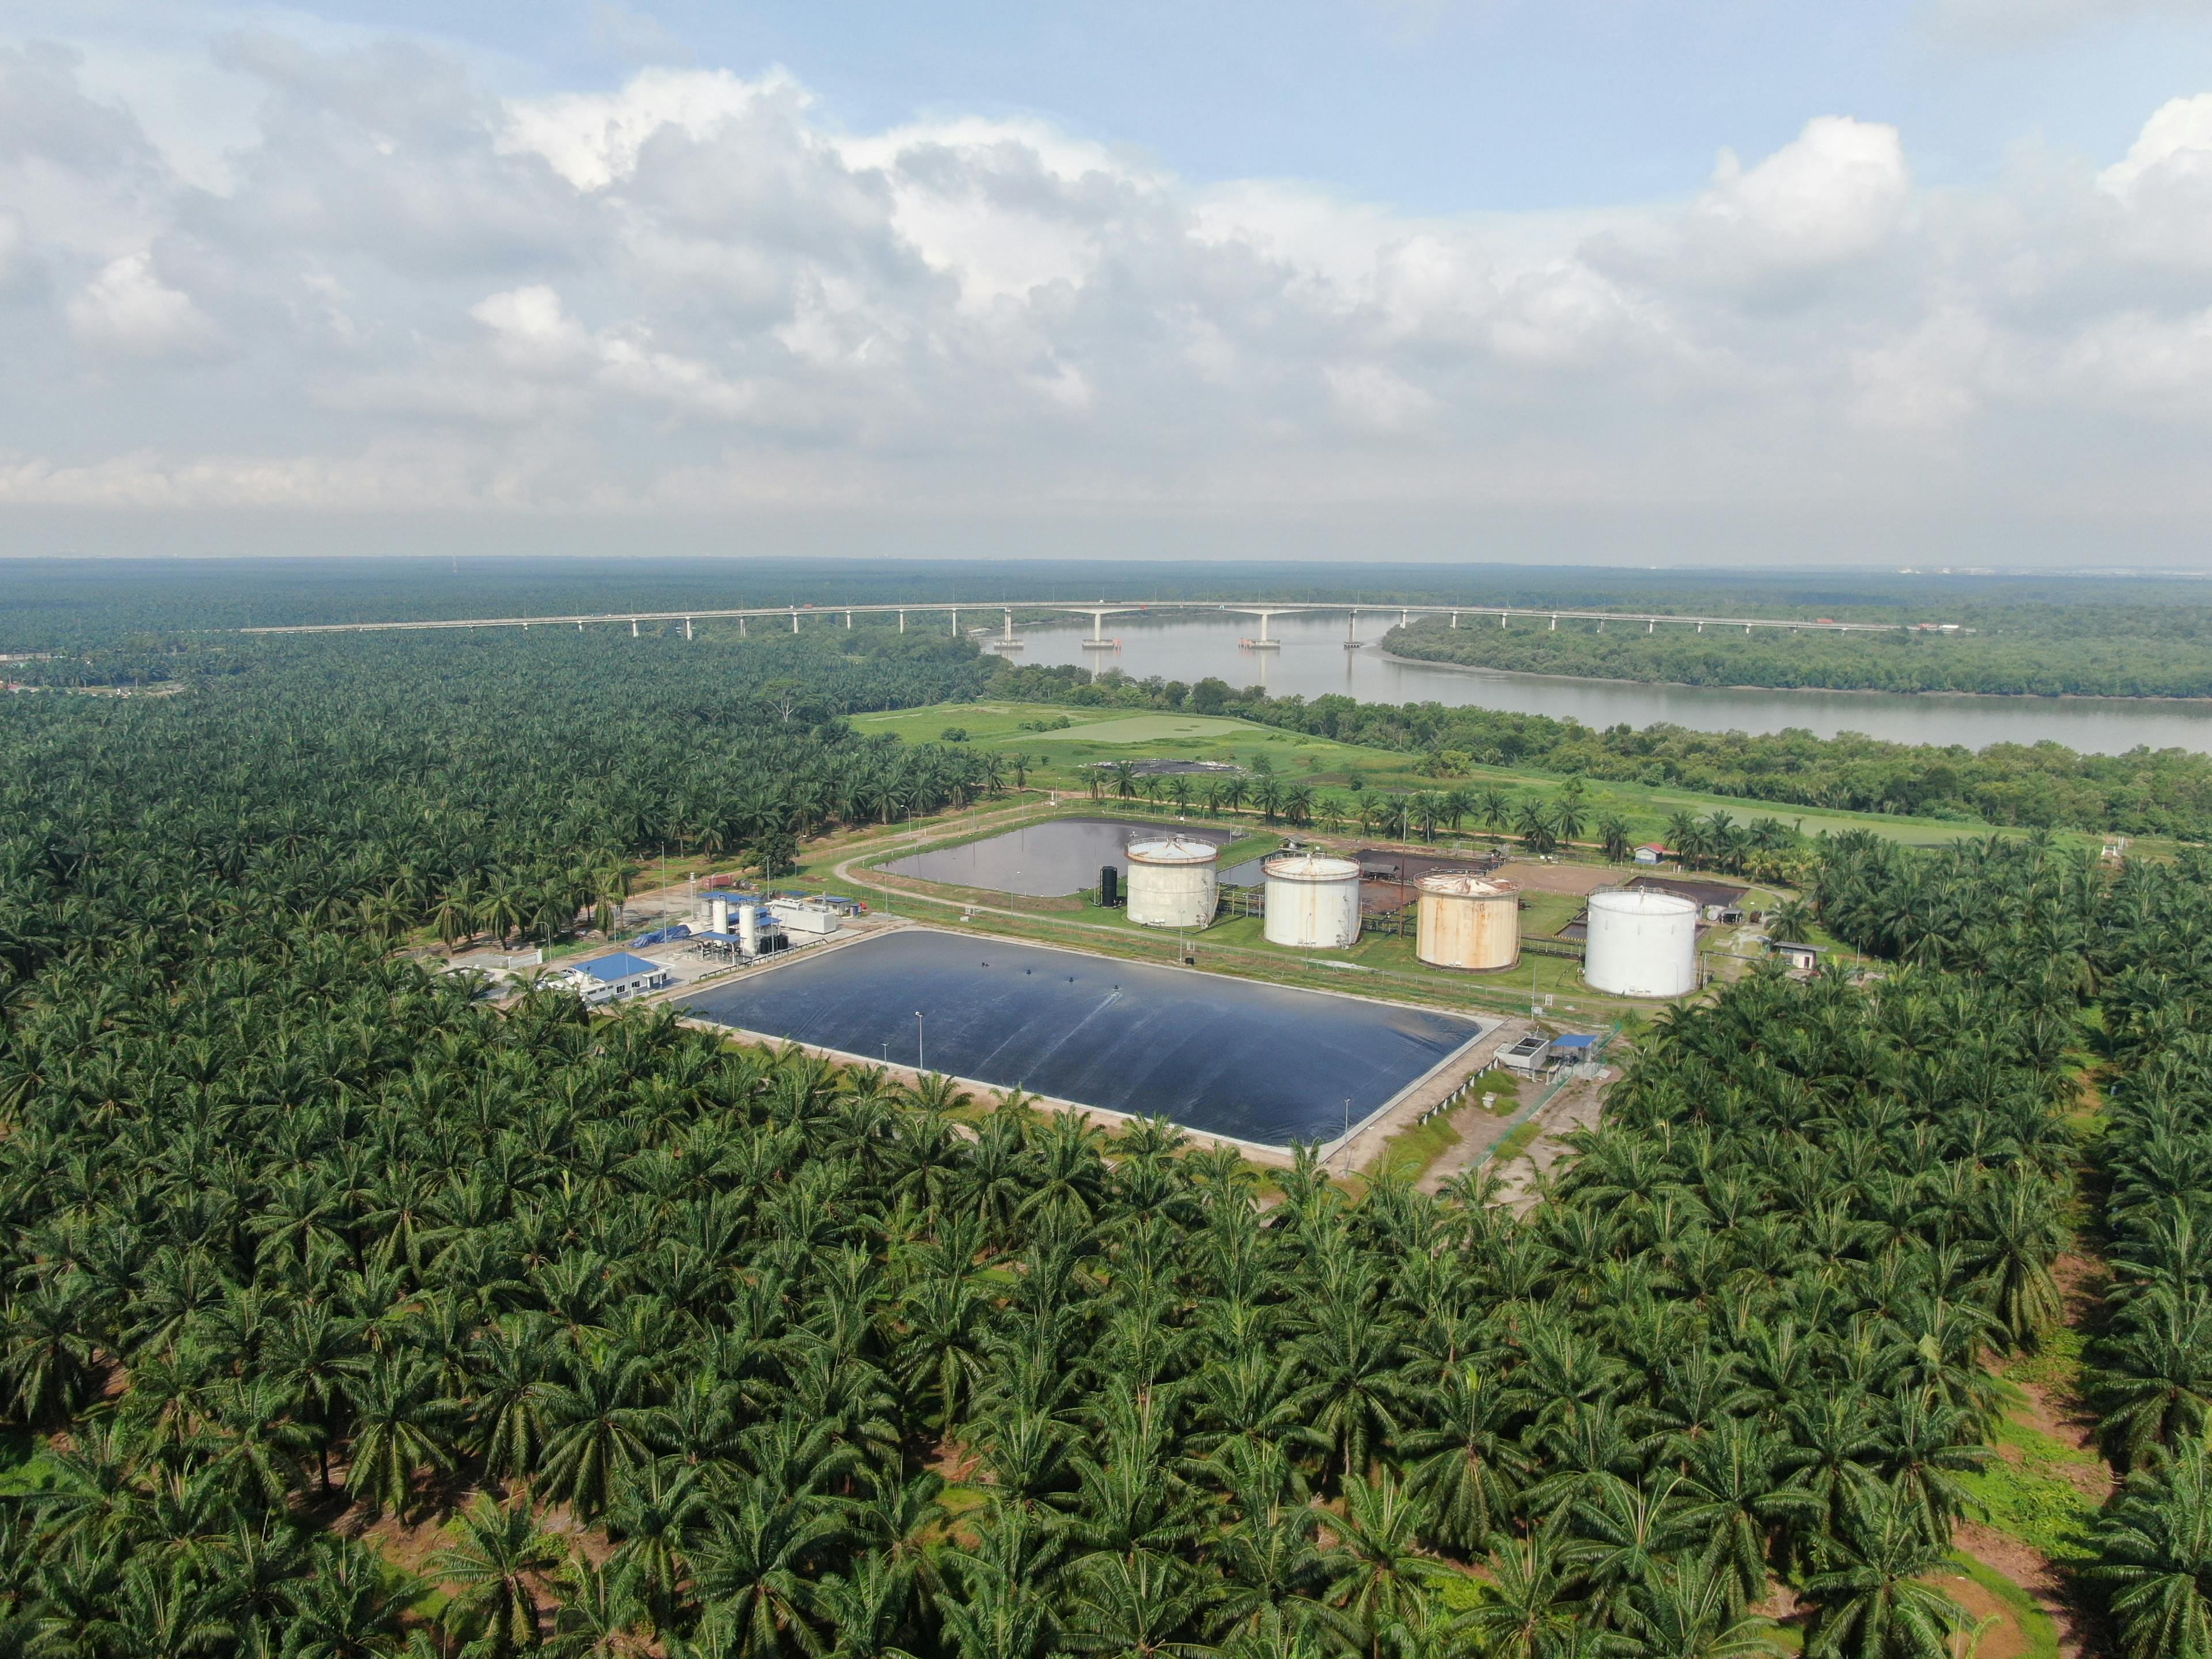 Cenergi transforms POME into renewable biogas in Malaysia, using GSE geomembranes. This project reduced GHG and the approach highlights innovation in waste recycling and contribution to renewable energy goals. 